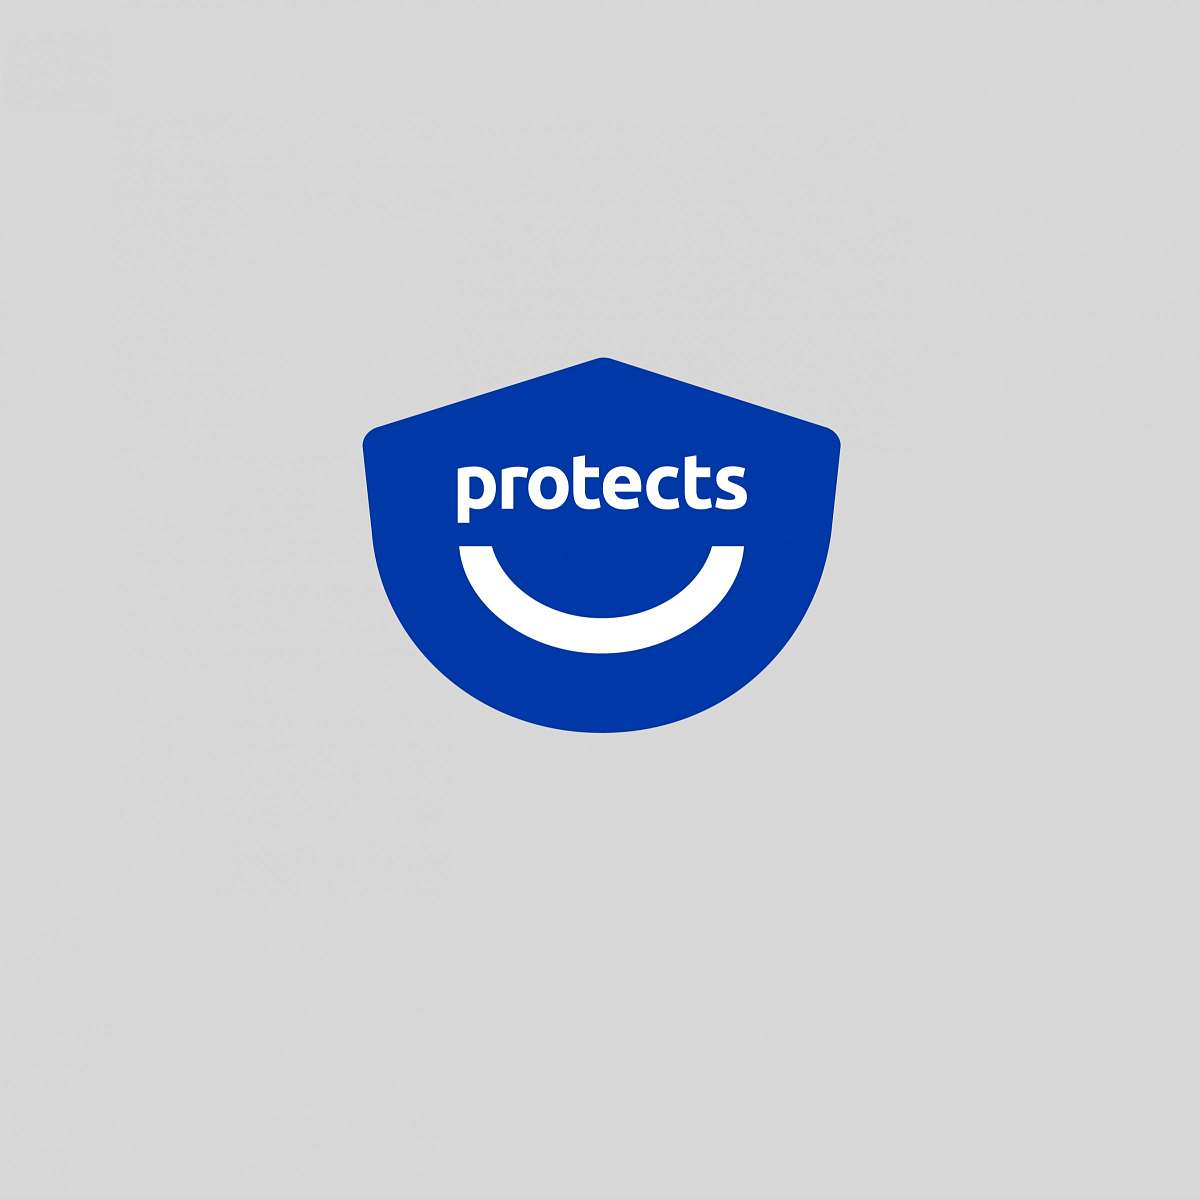 Protects